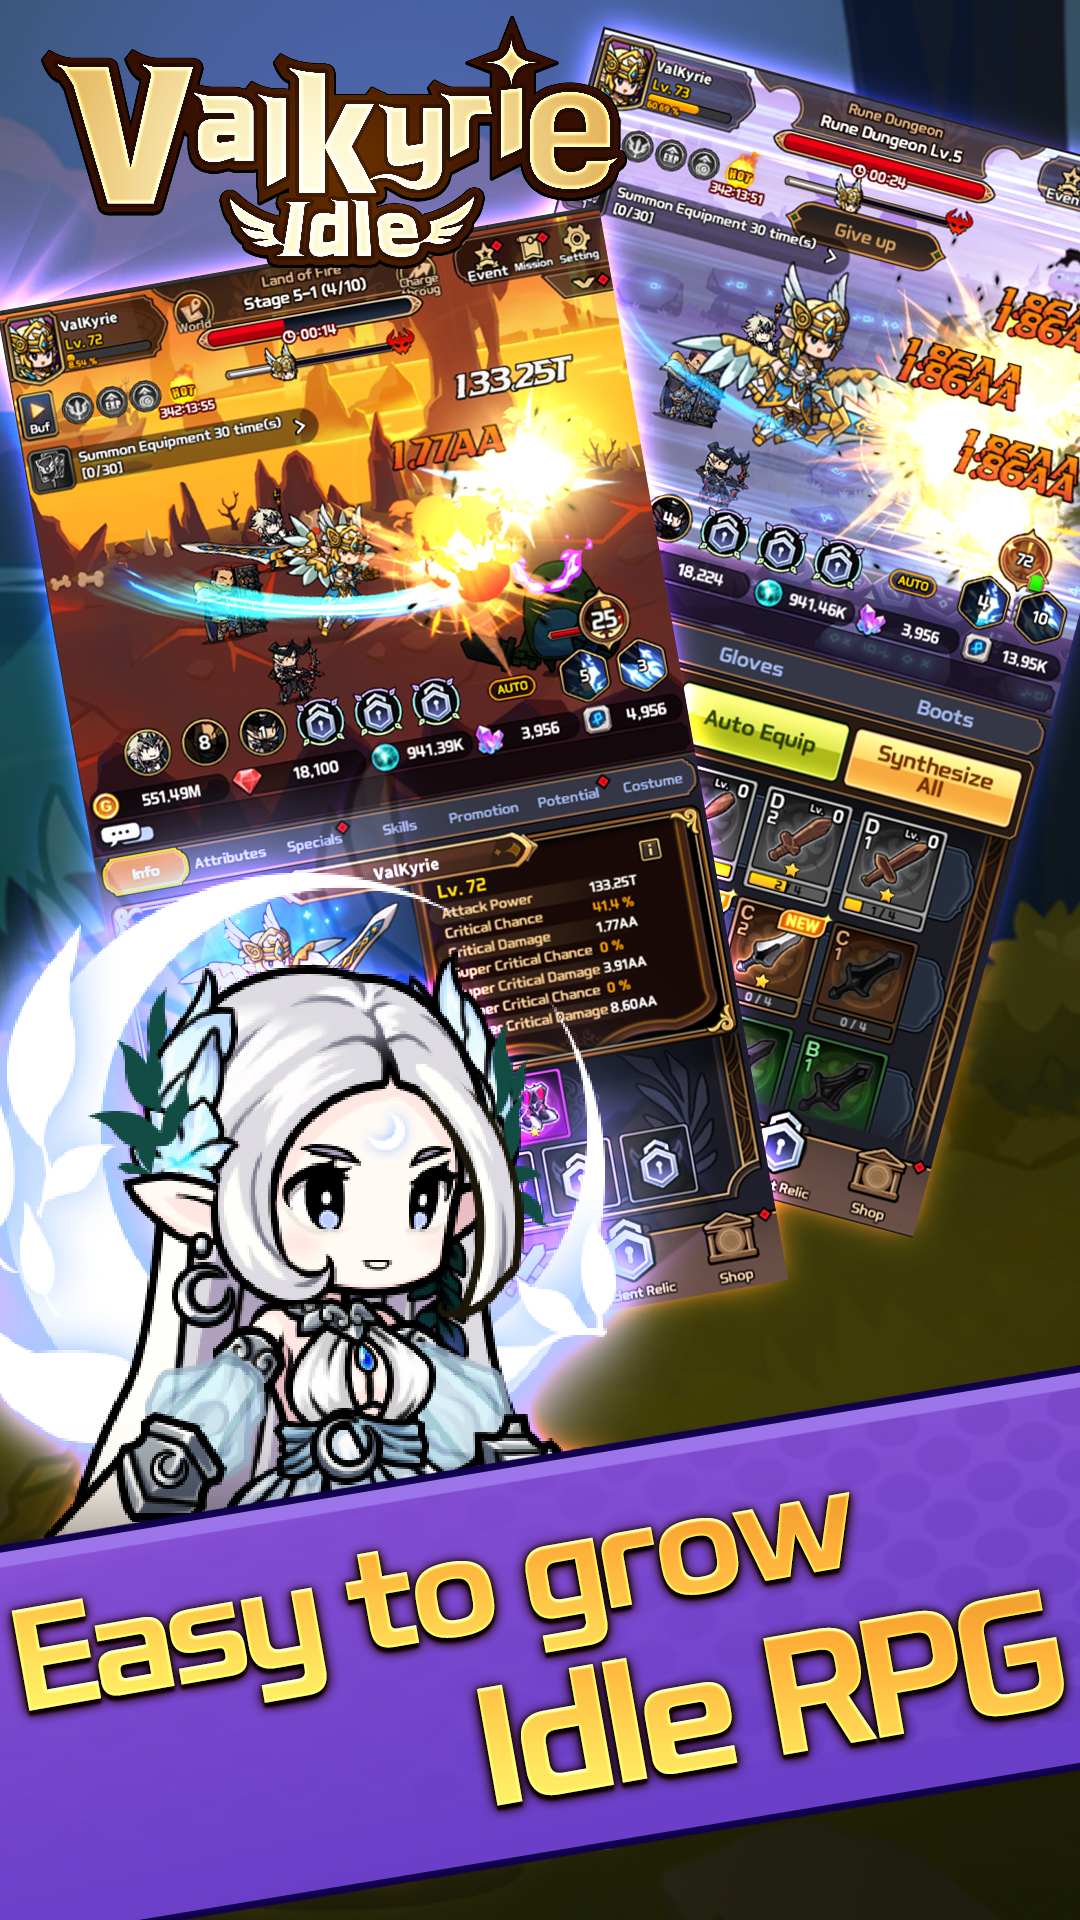 Download and play Valkyrie Story: Idle RPG on PC & Mac (Emulator)